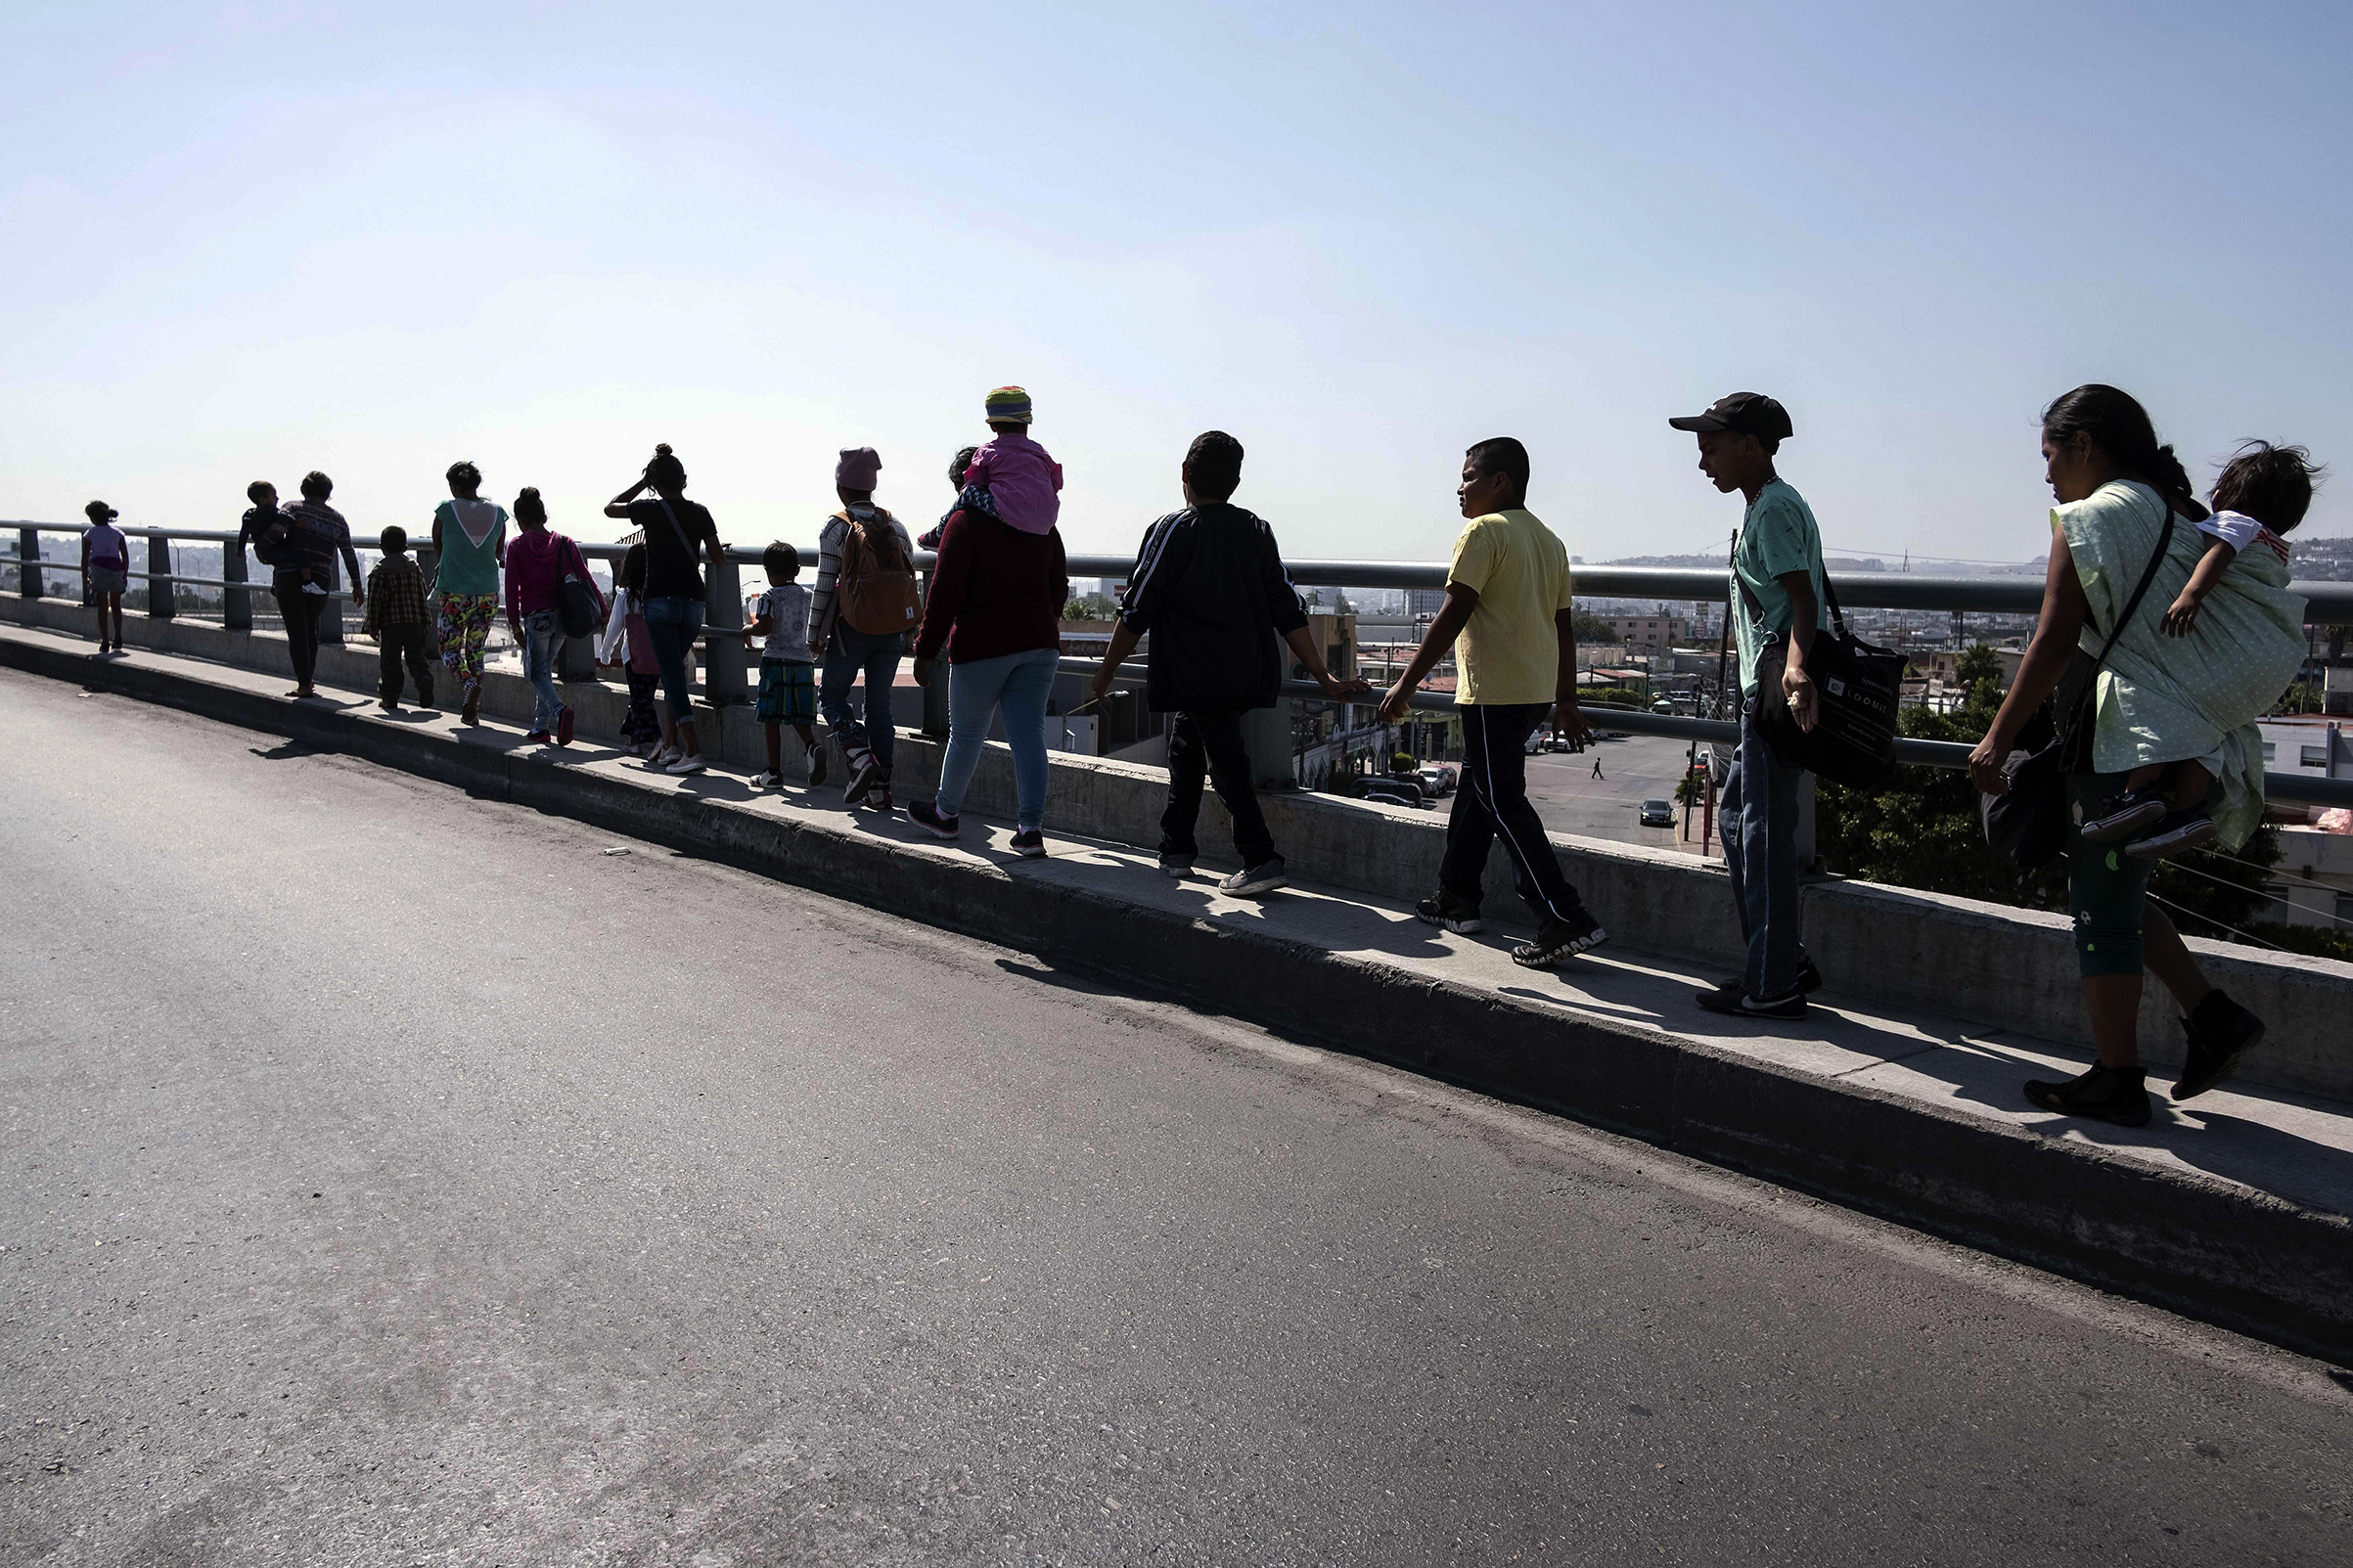 Central American migrants travelling in the "Migrant Via Crucis" caravan walk to their legal counselling meeting in Tijuana, Baja California state, Mexico, on April 28, 2018 (GUILLERMO ARIAS—AFP/Getty Images)